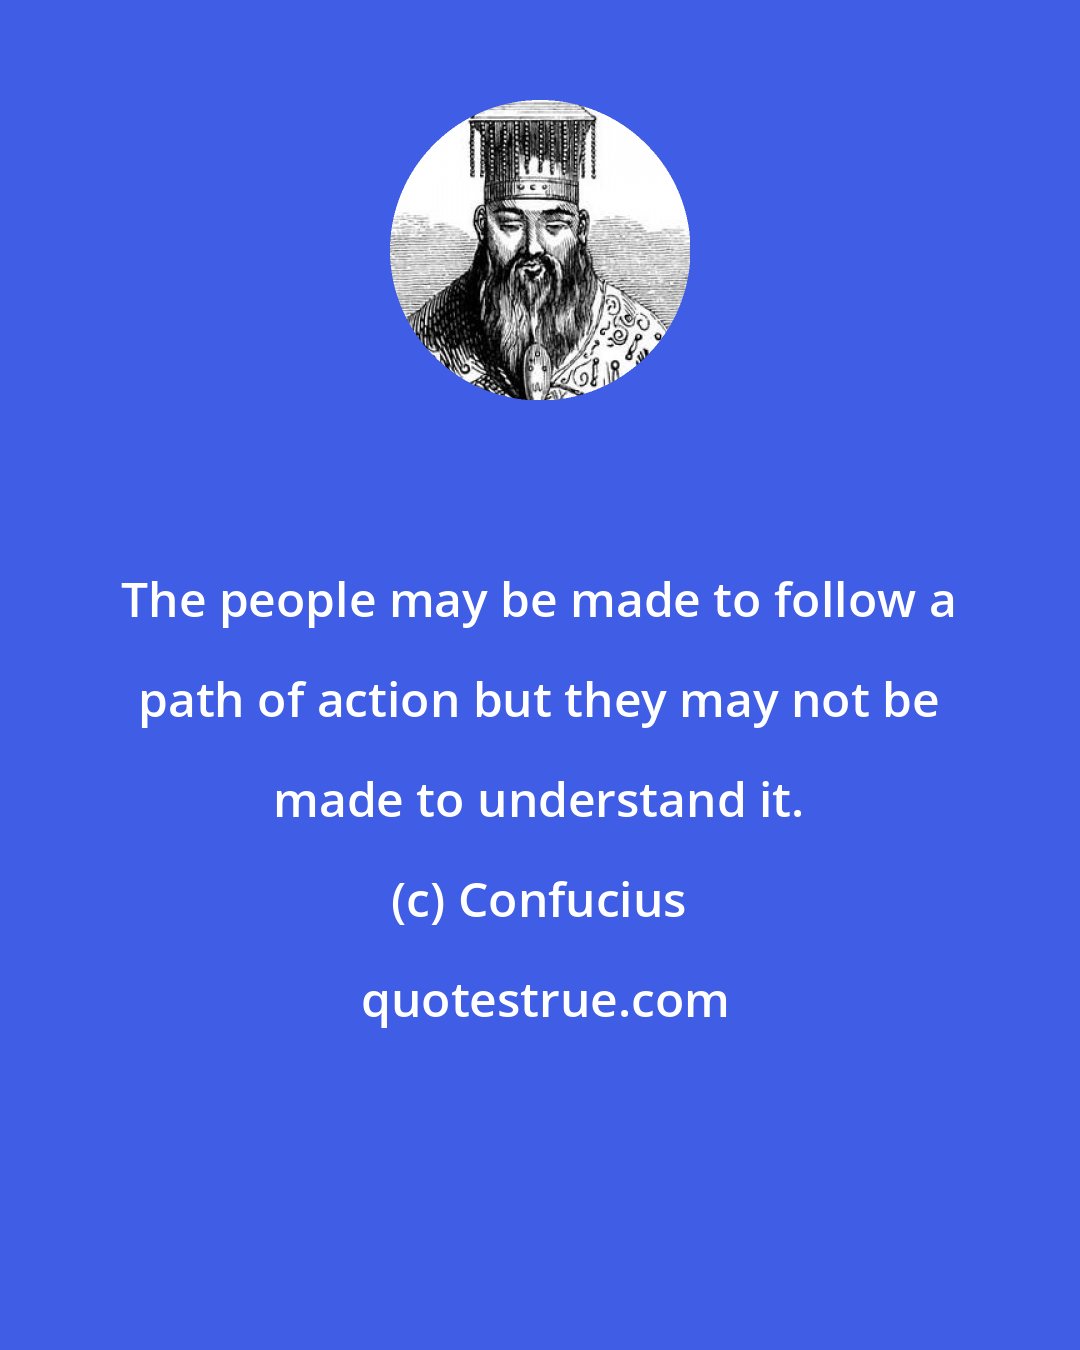 Confucius: The people may be made to follow a path of action but they may not be made to understand it.